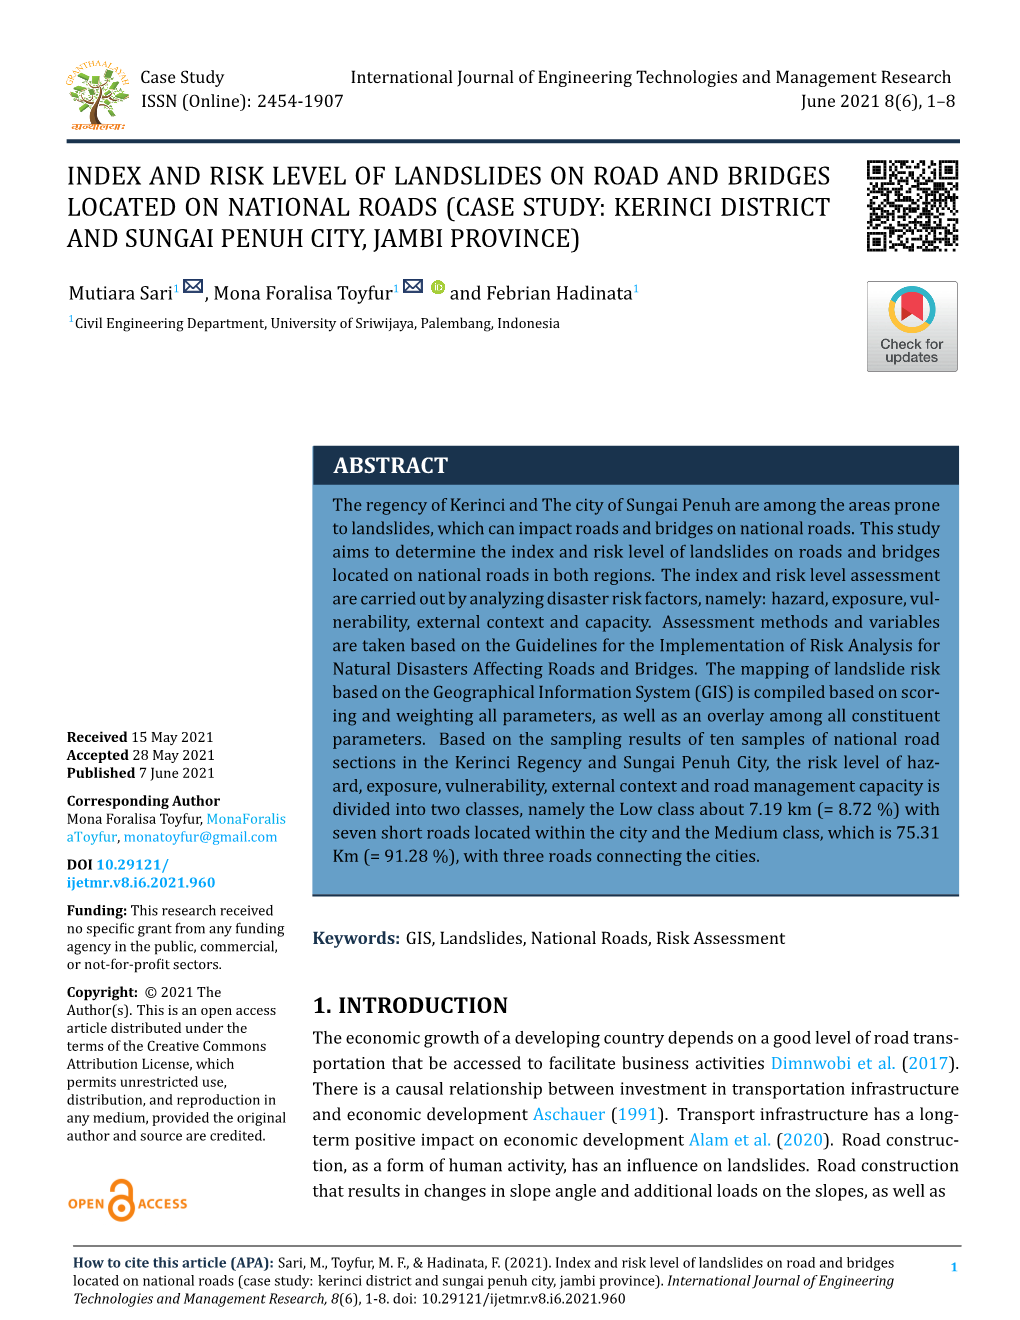 Index and Risk Level of Landslides on Road and Bridges Located on National Roads (Case Study: Kerinci District and Sungai Penuh City, Jambi Province)